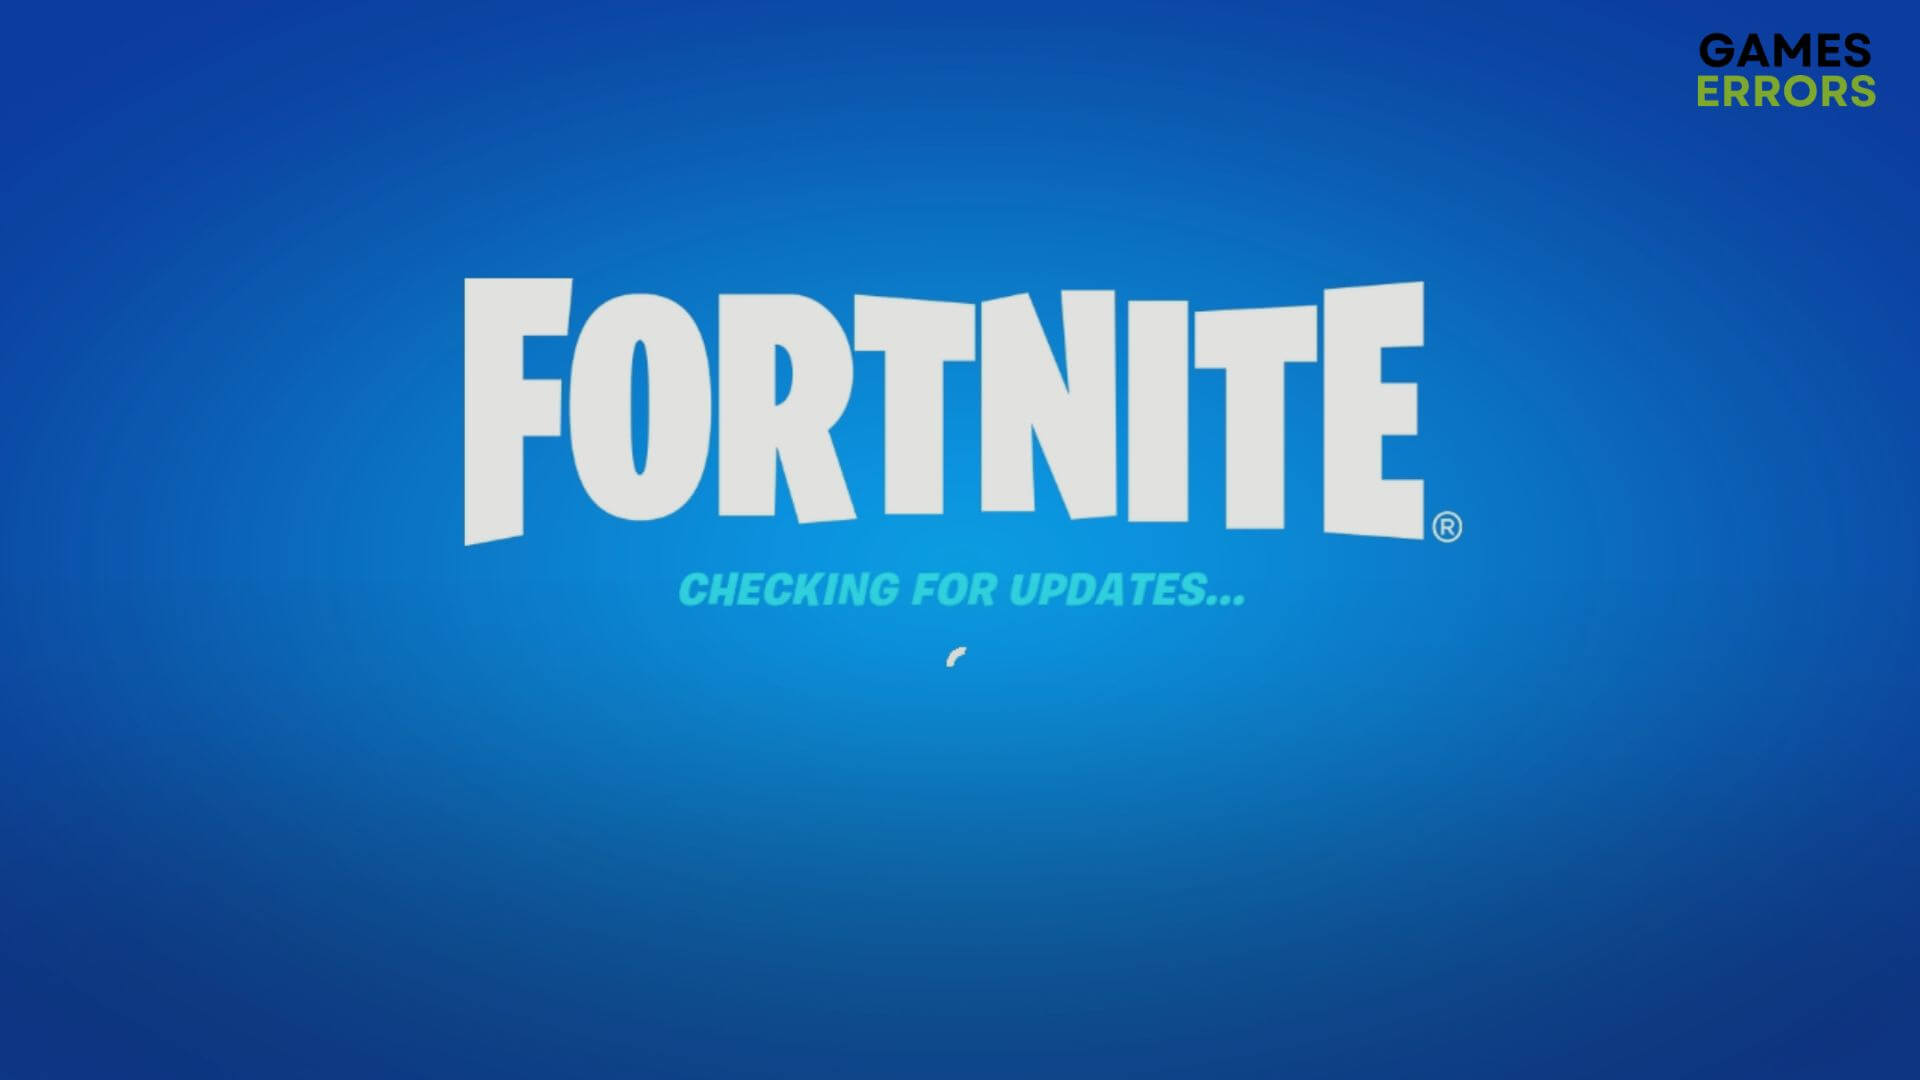 Make sure you are running the latest version of Fortnite.
Check for any available updates and install them.